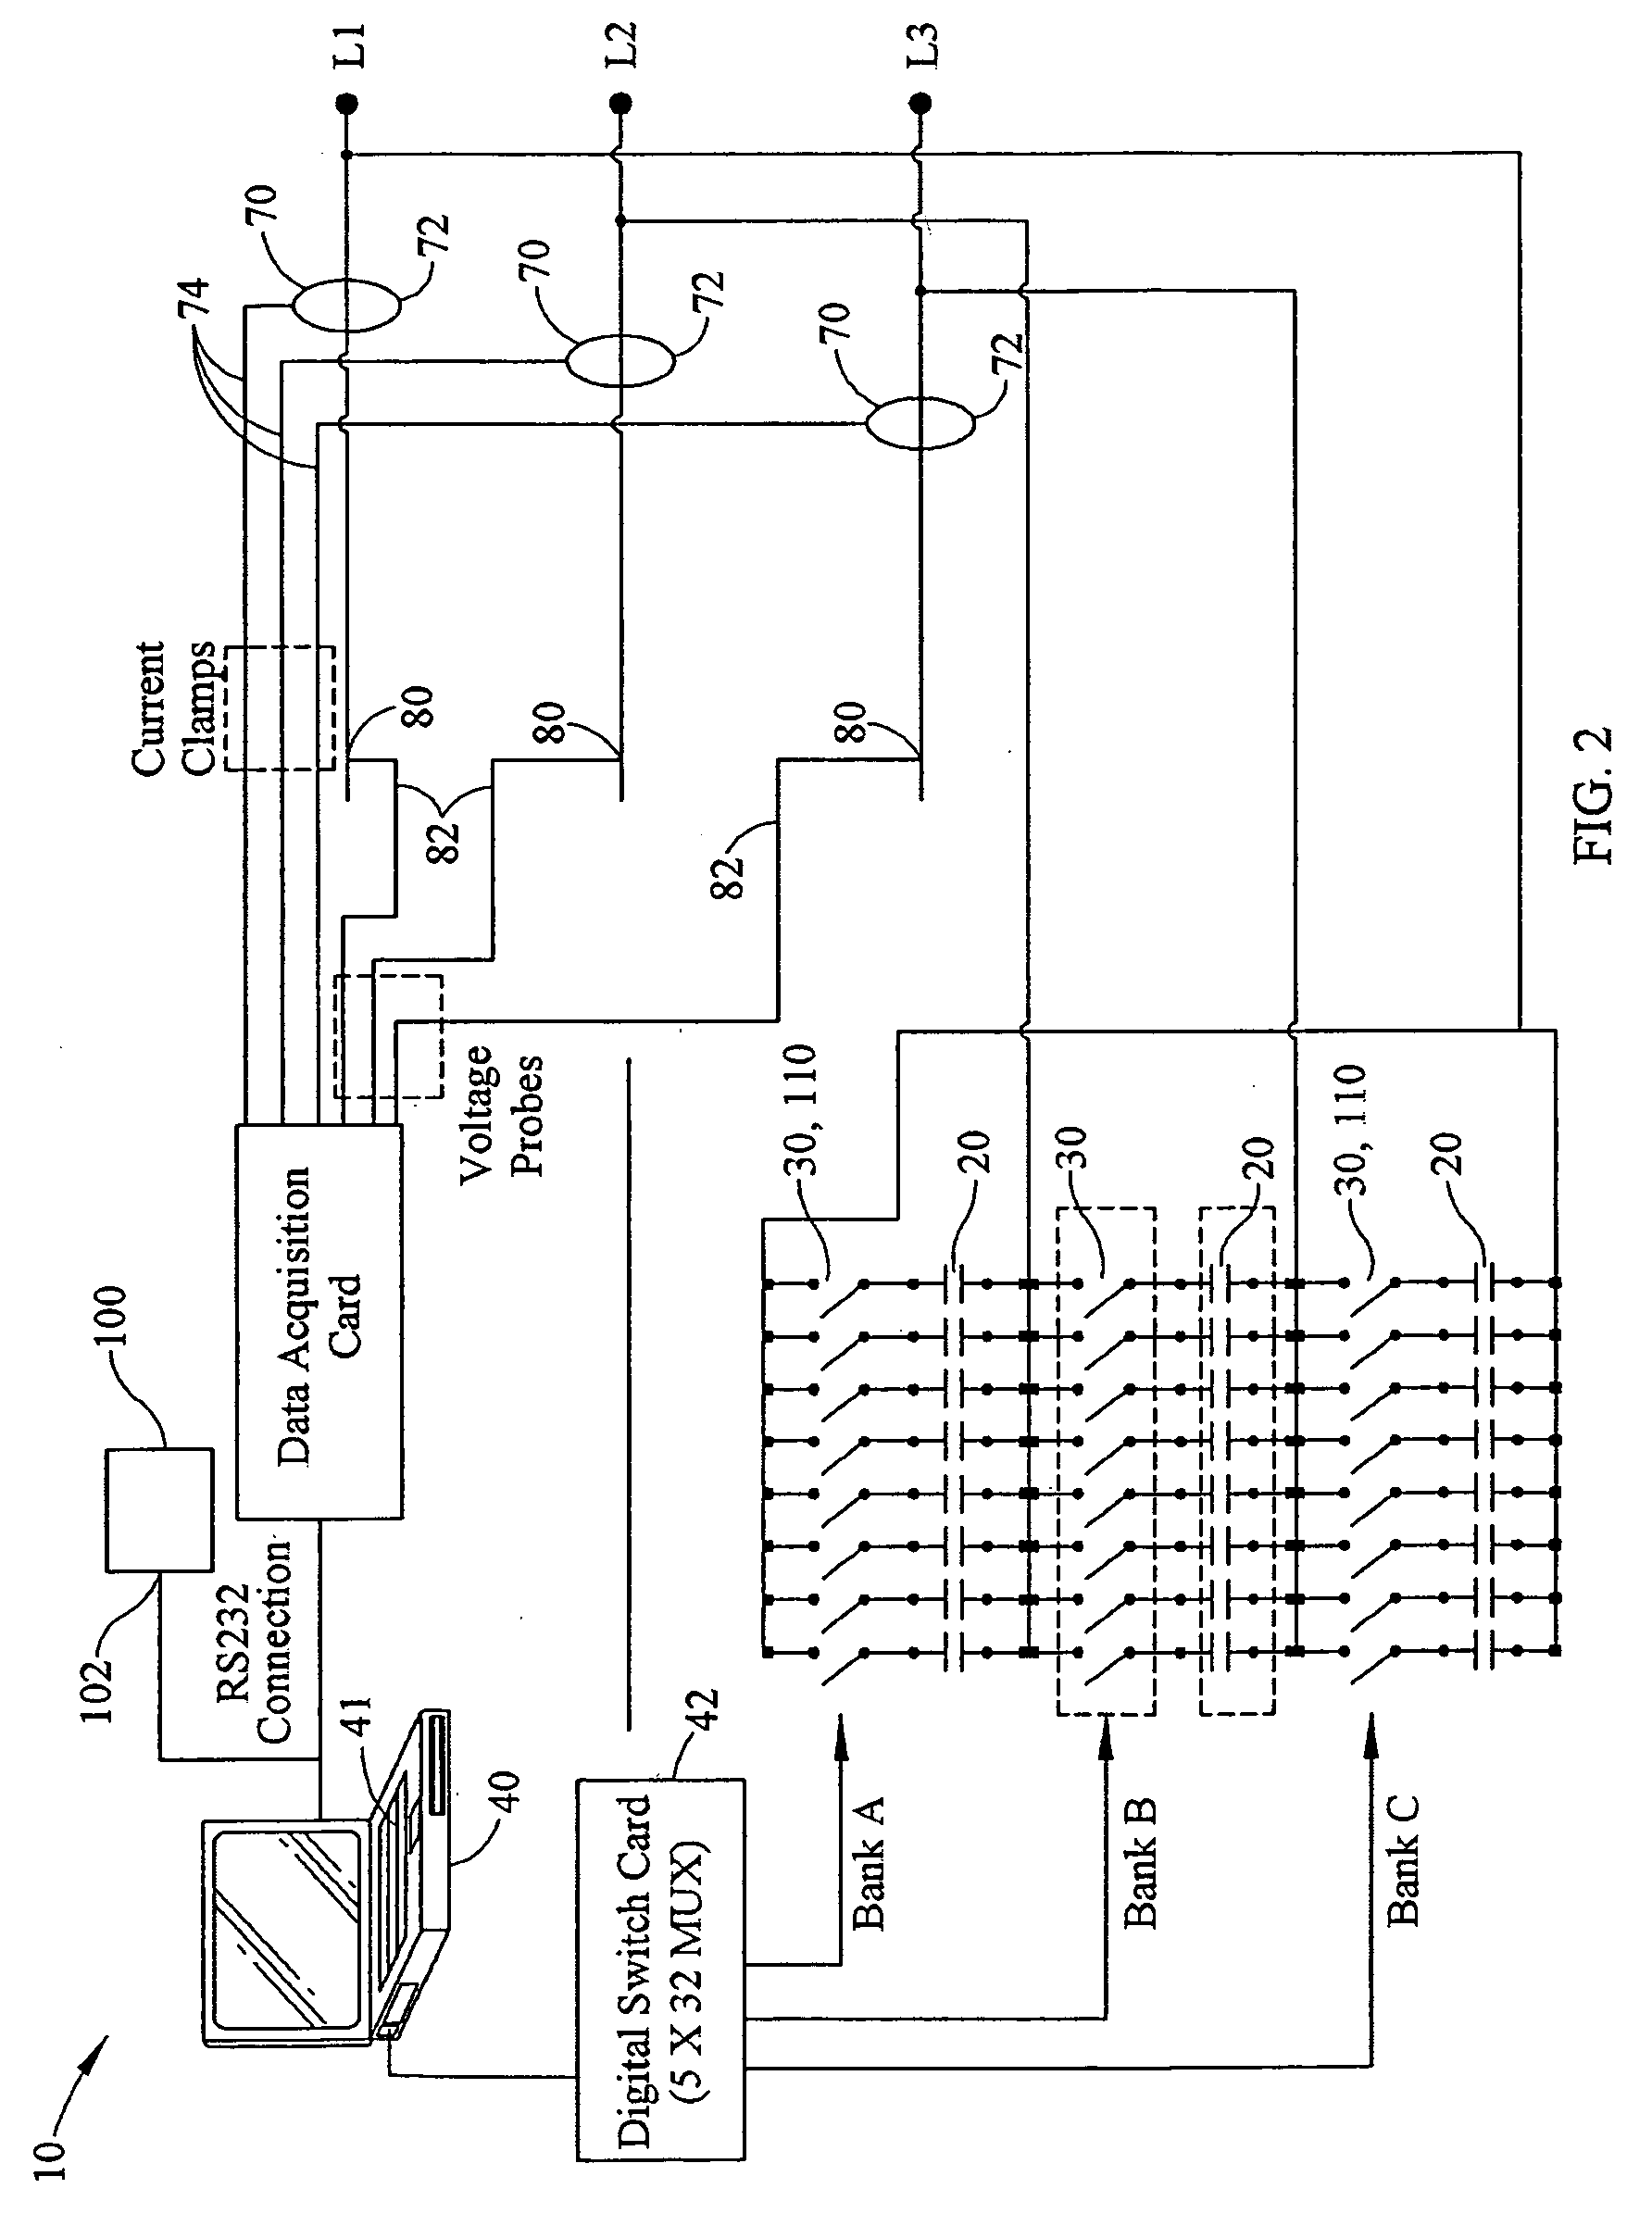 Power Factor Correction Analysis System and Method